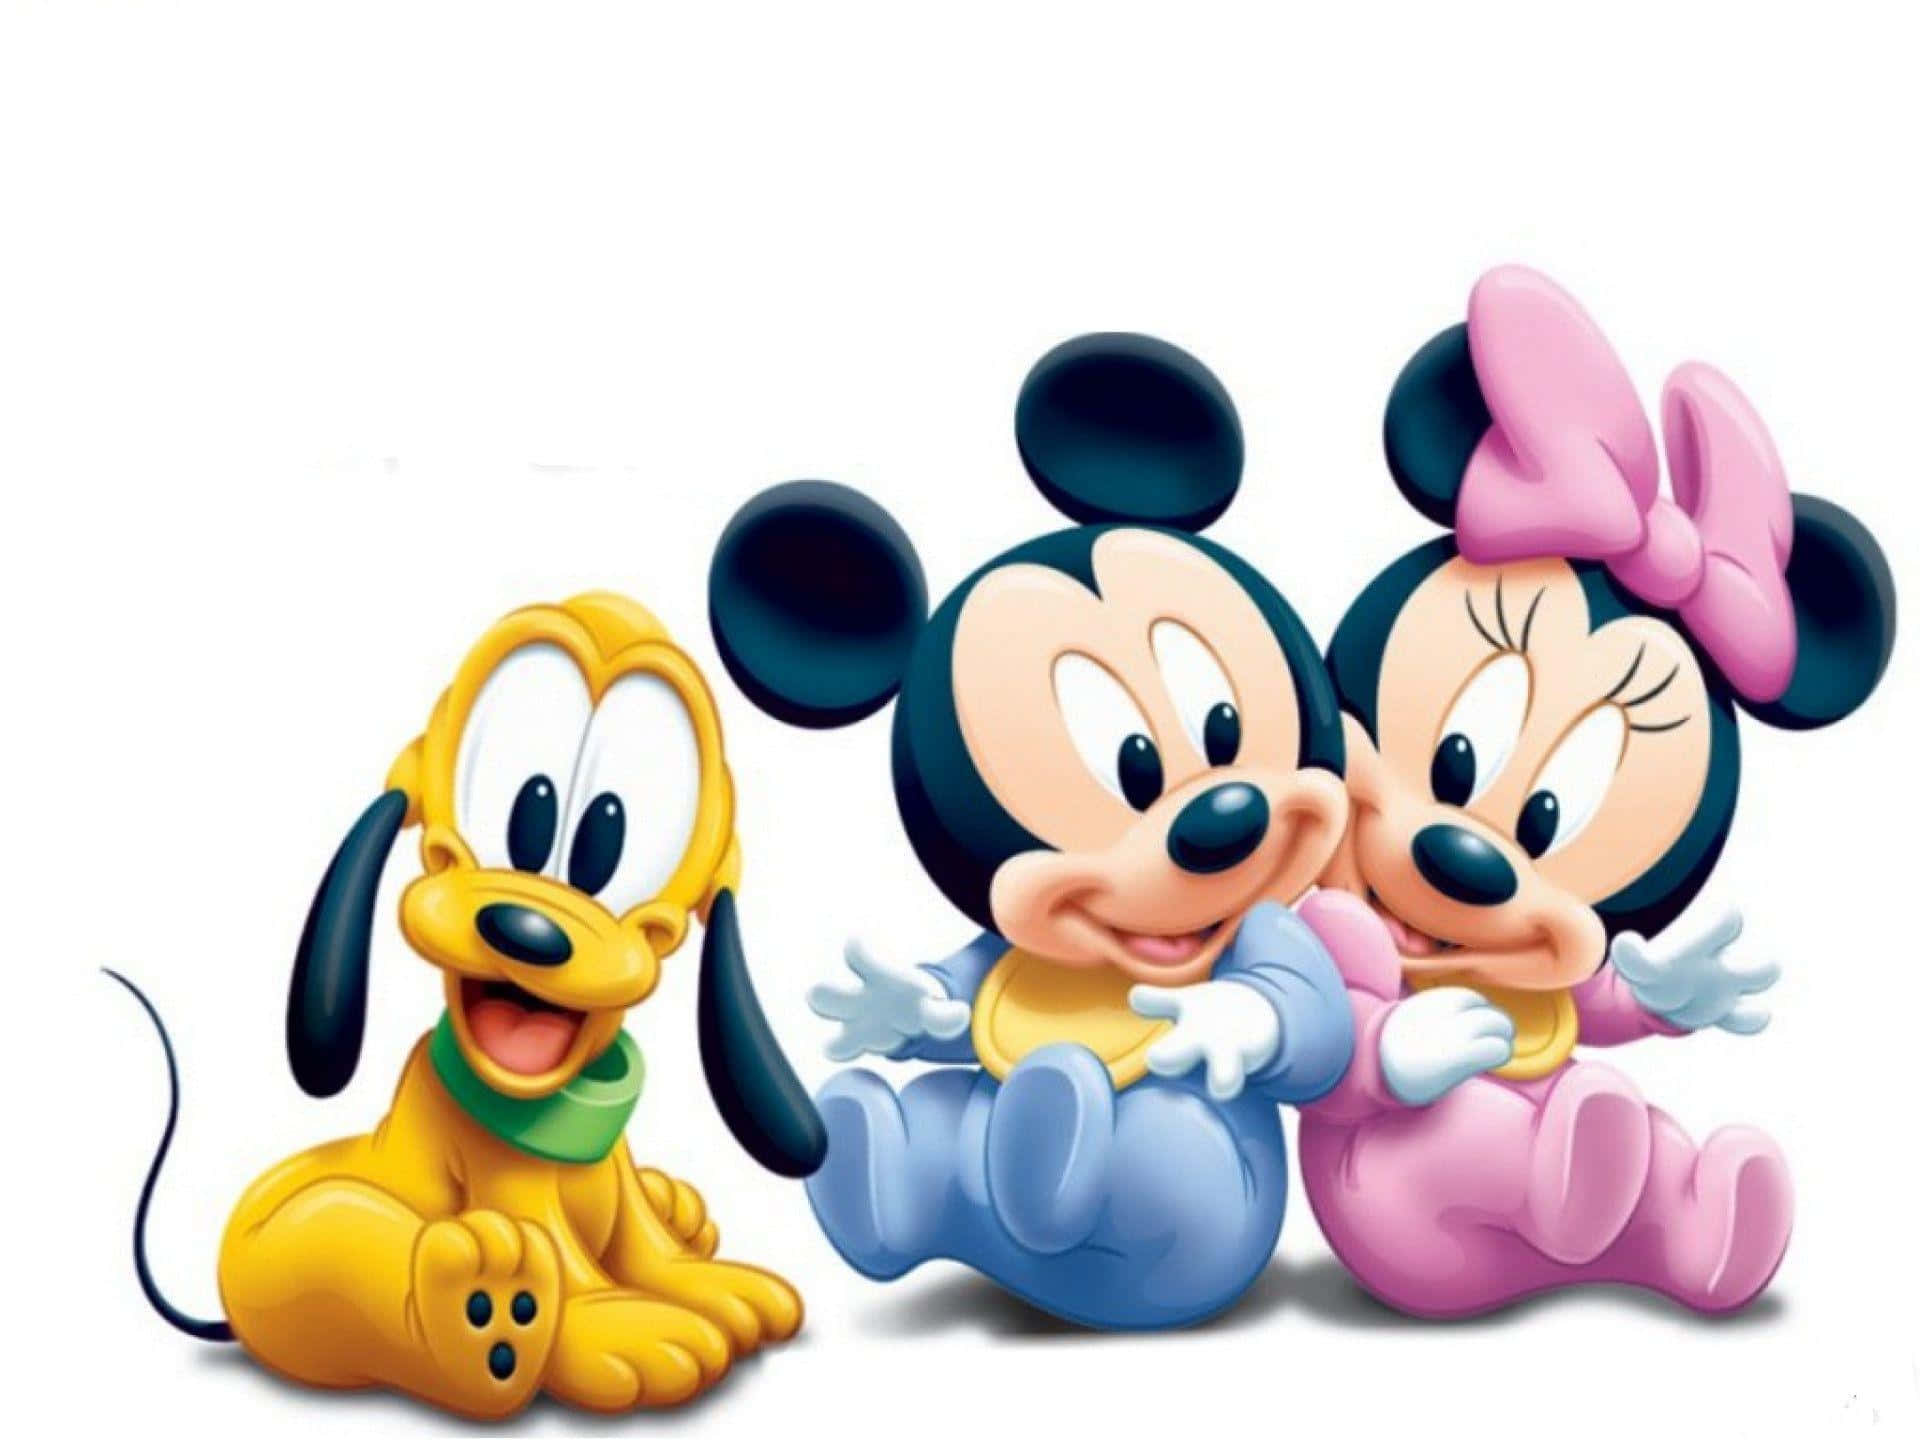 Cuddle Up with Cute Mickey Mouse! Wallpaper